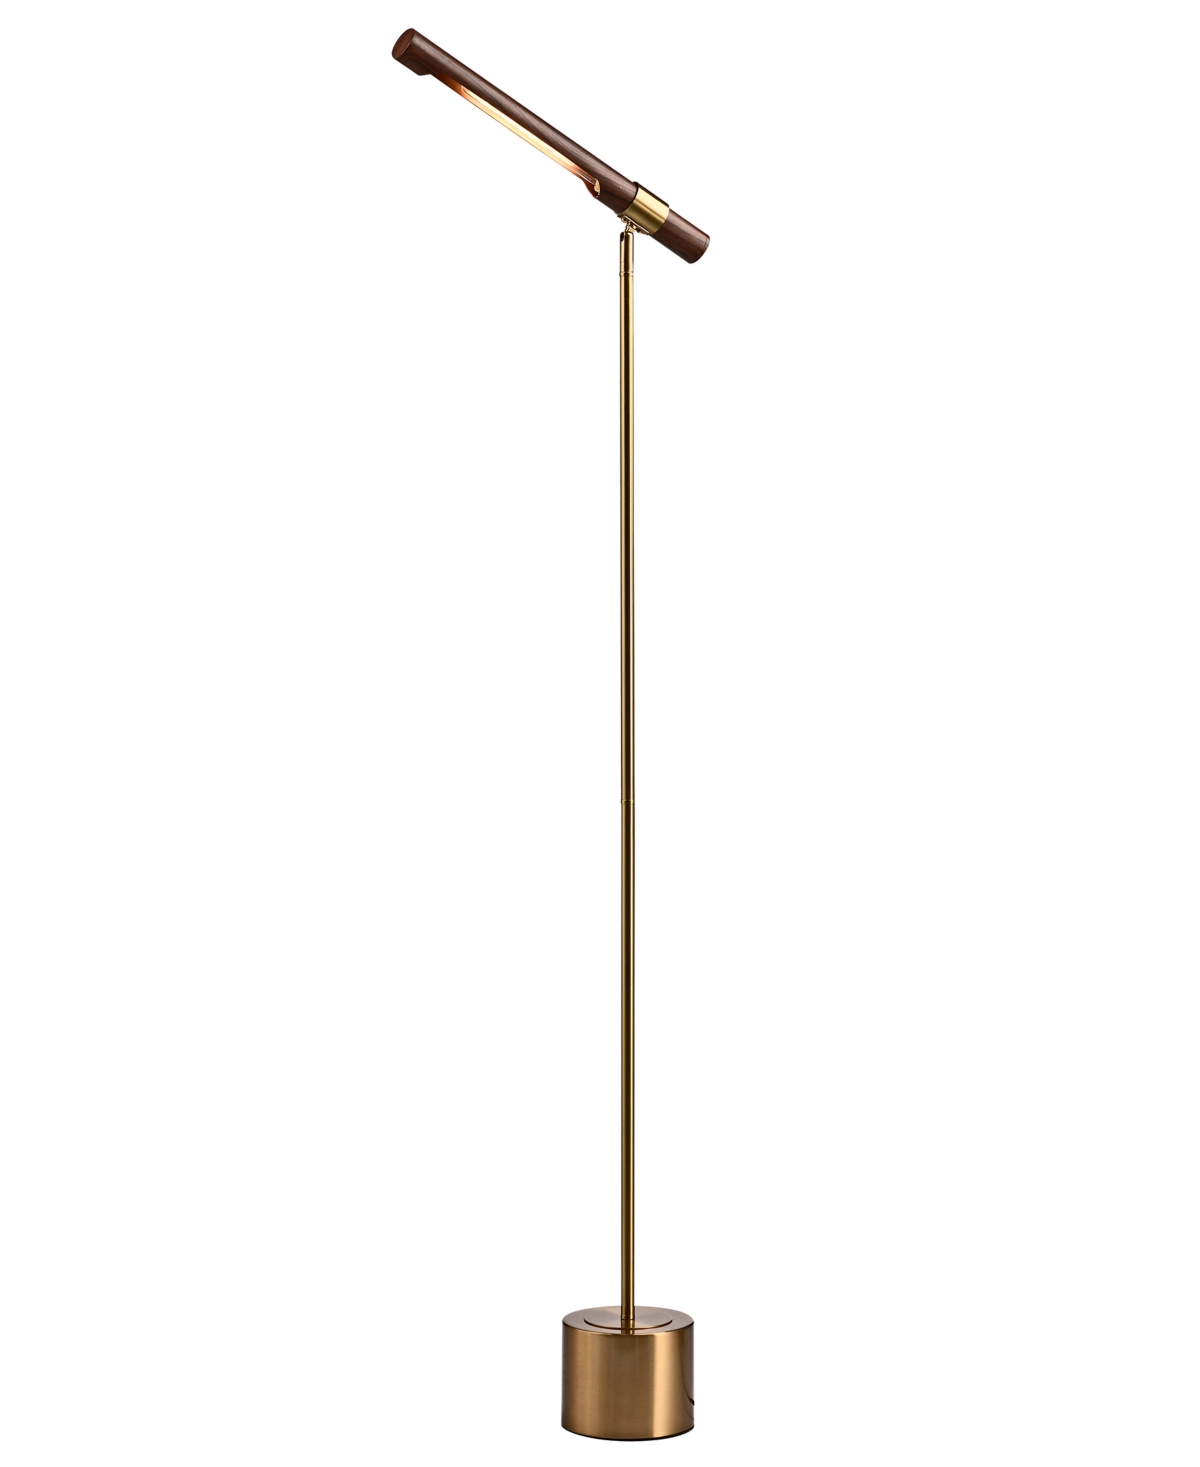 Home Accessories Vesna 17" 1-light Indoor Finish Floor Lamp With Light Kit In Brass And Faux Wood Grain